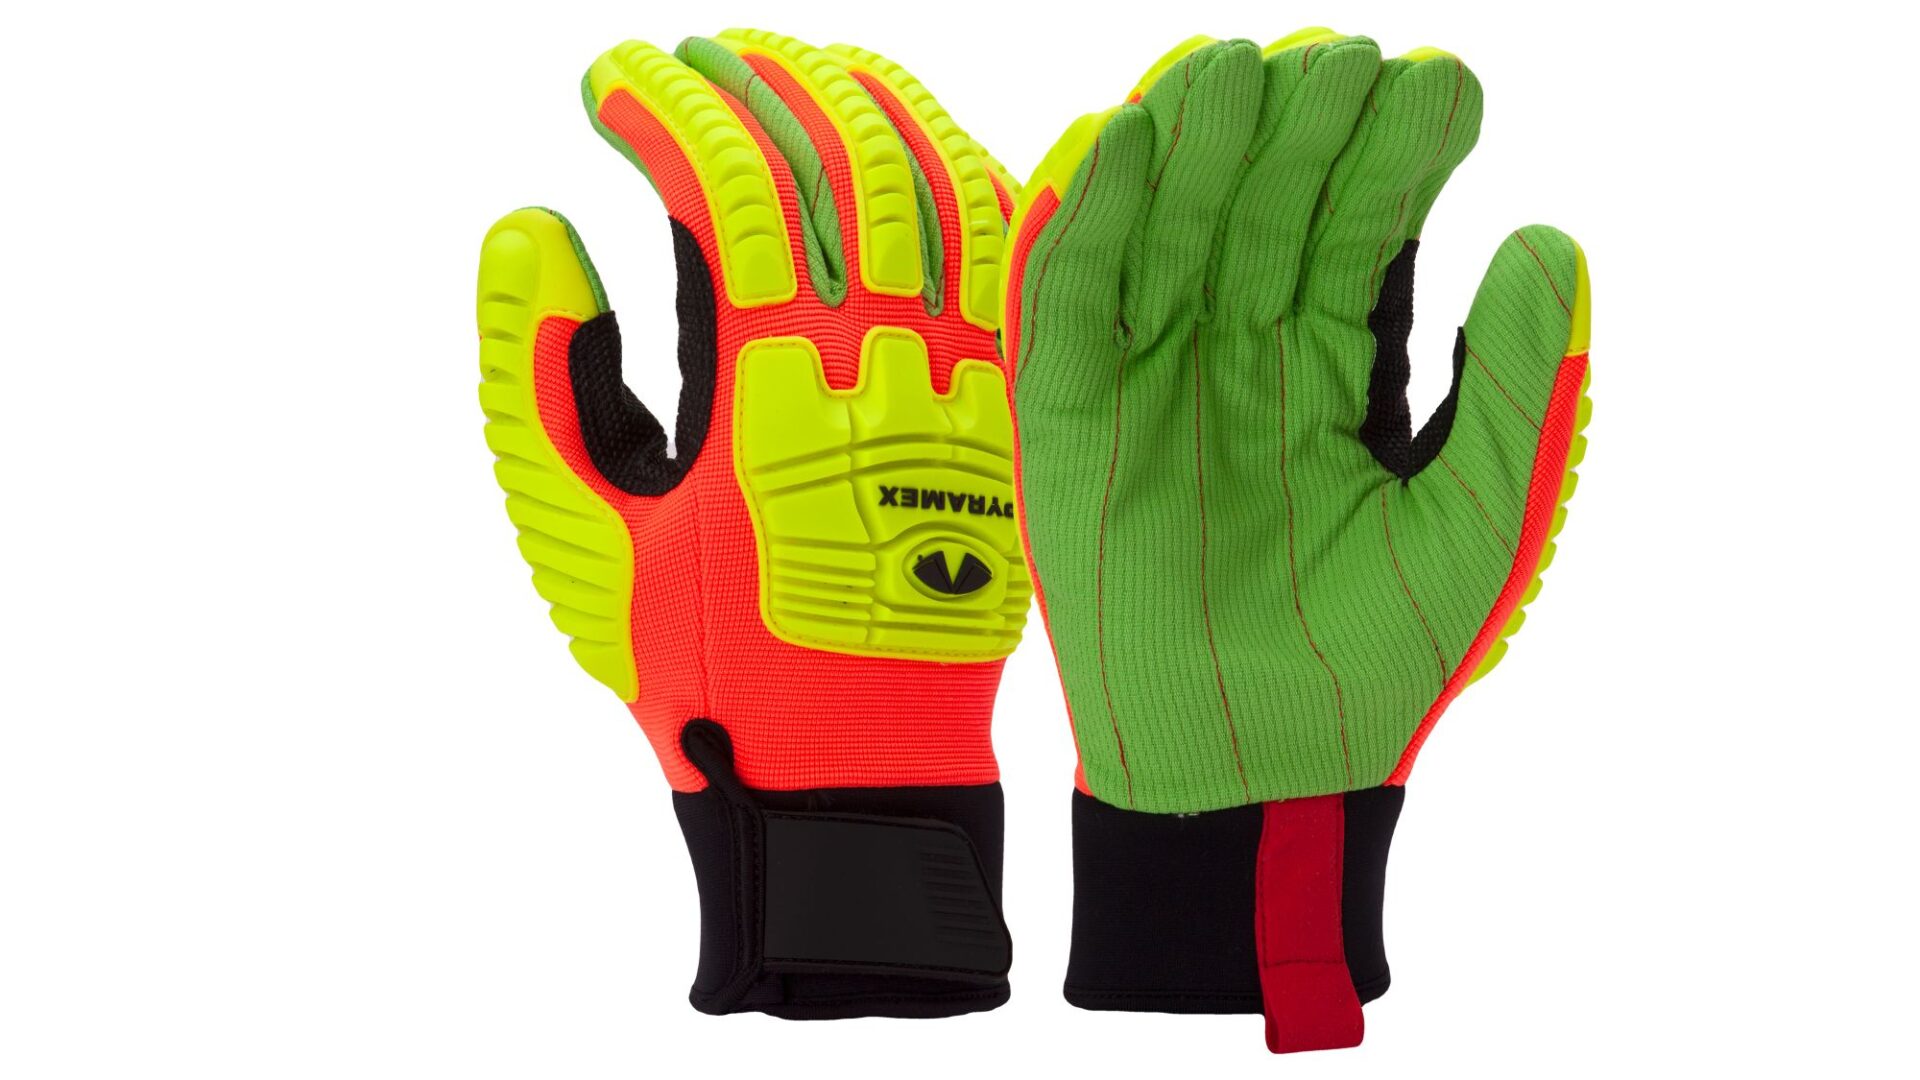 Green, Orange and Black Gloves With Yellow Padding